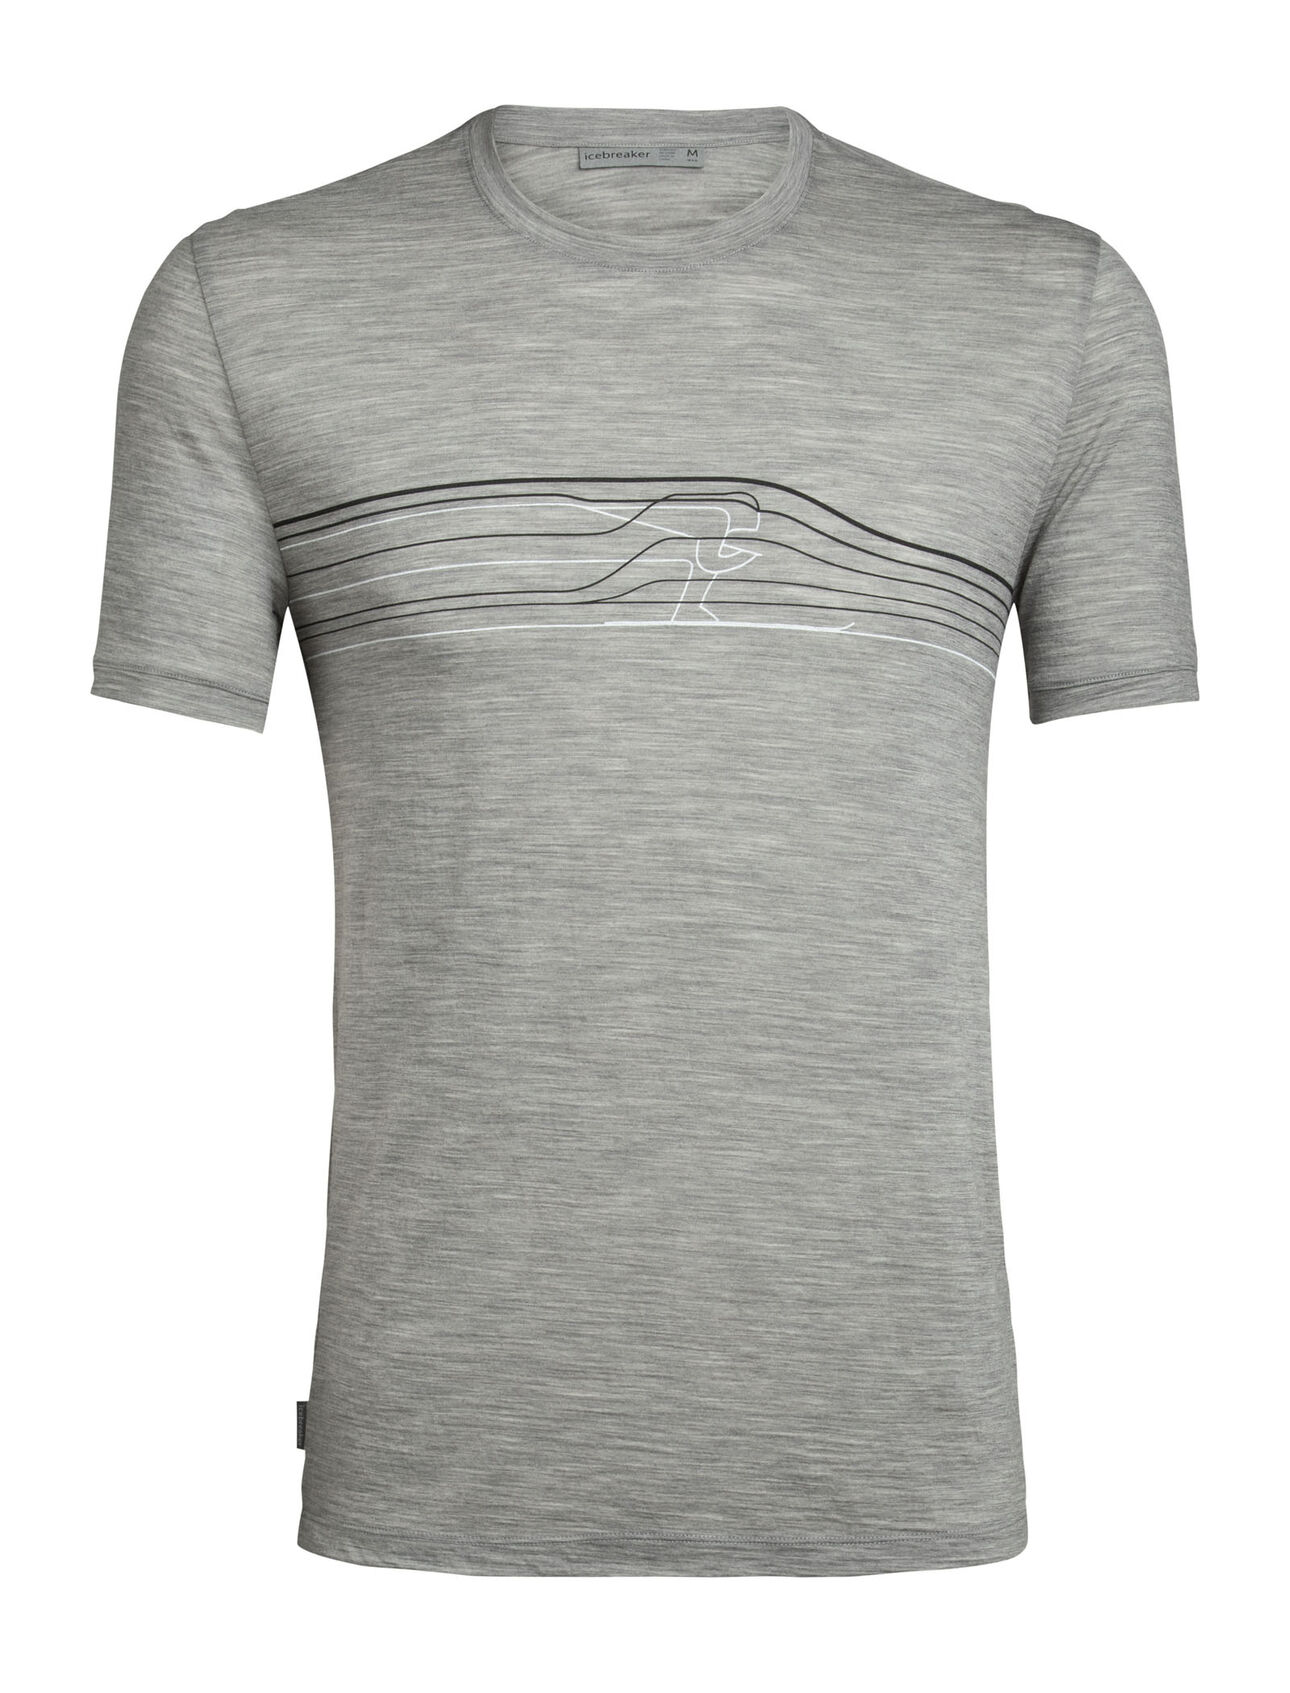 dla mężczyzn Merino Spector Short Sleeve Crewe T-Shirt Ski Racer A lightweight, breathable, and versatile merino wool T-shirt ideal for everything from hiking to travel, our Spector Short Sleeve Crewe Ski Racer is a go-to for any and every day.